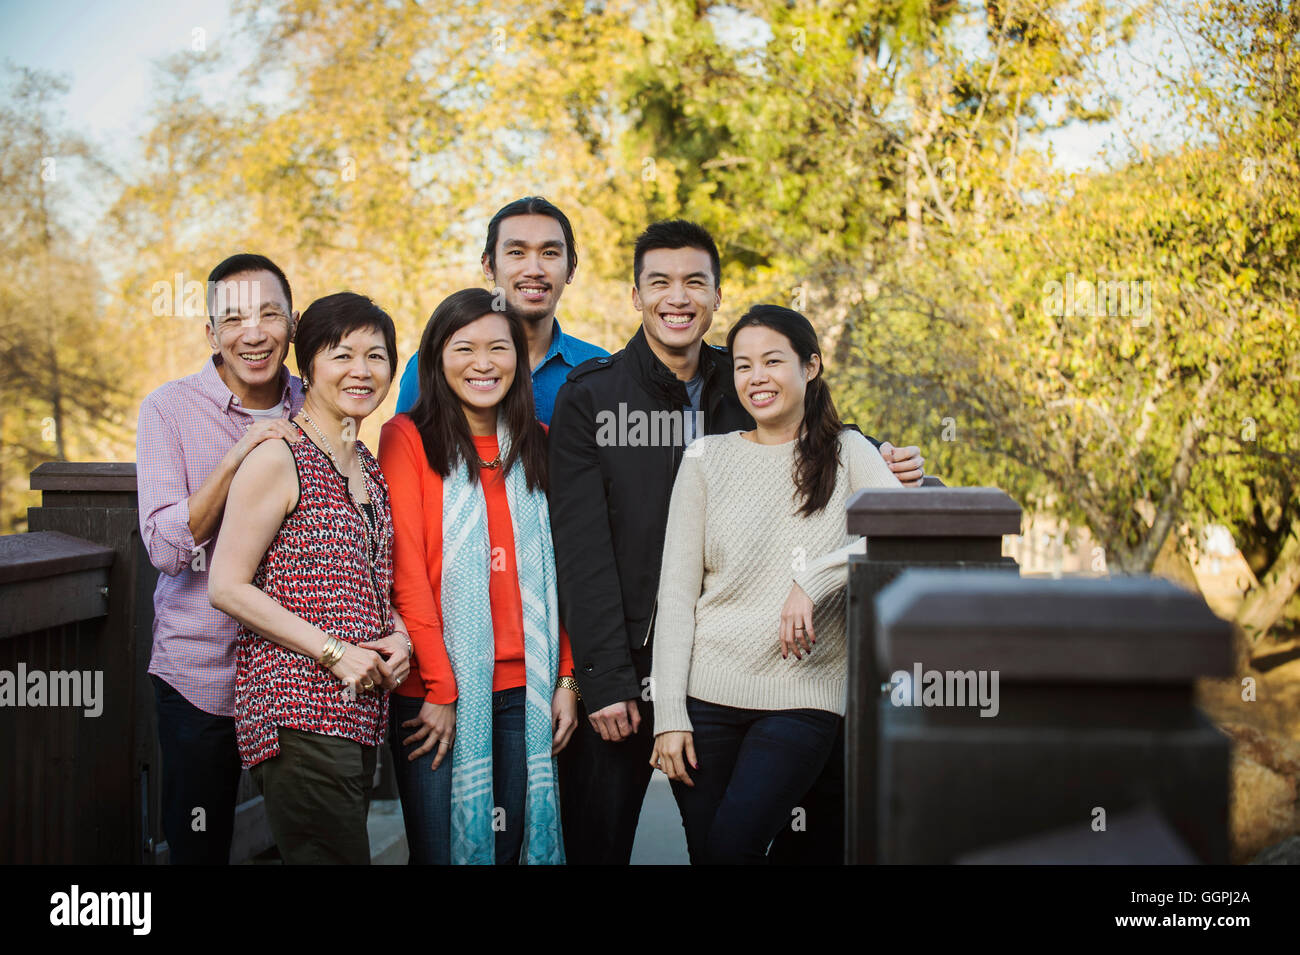 Chinese family smiling outdoors Stock Photo